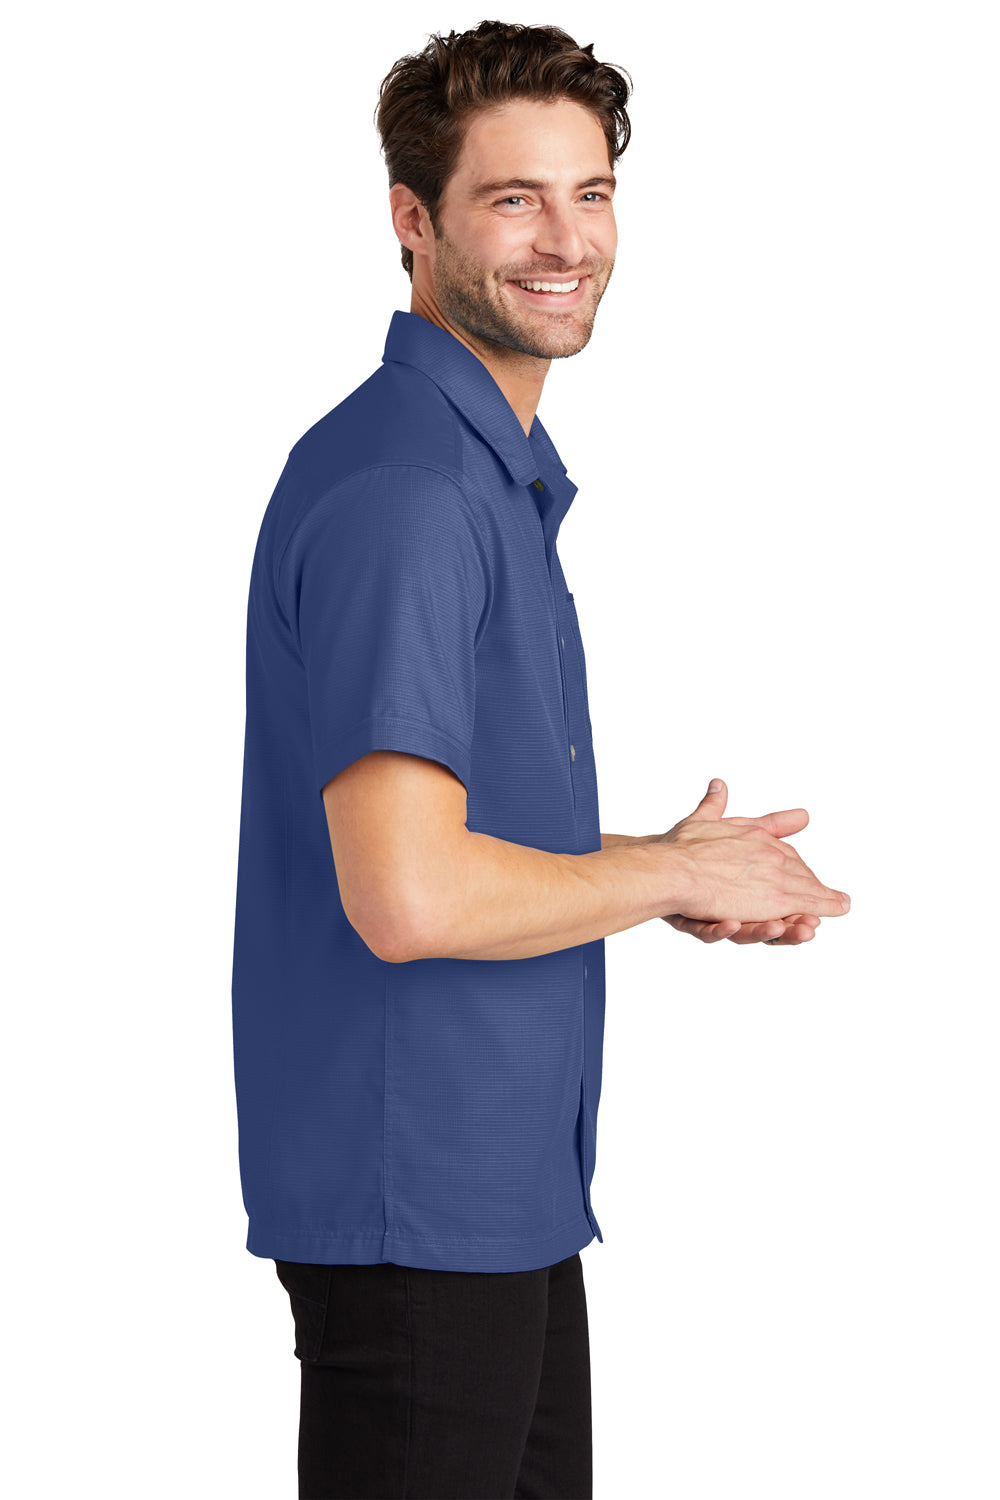 Port Authority S662 Mens Wrinkle Resistant Short Sleeve Button Down Camp Shirt w/ Pocket Royal Blue Side